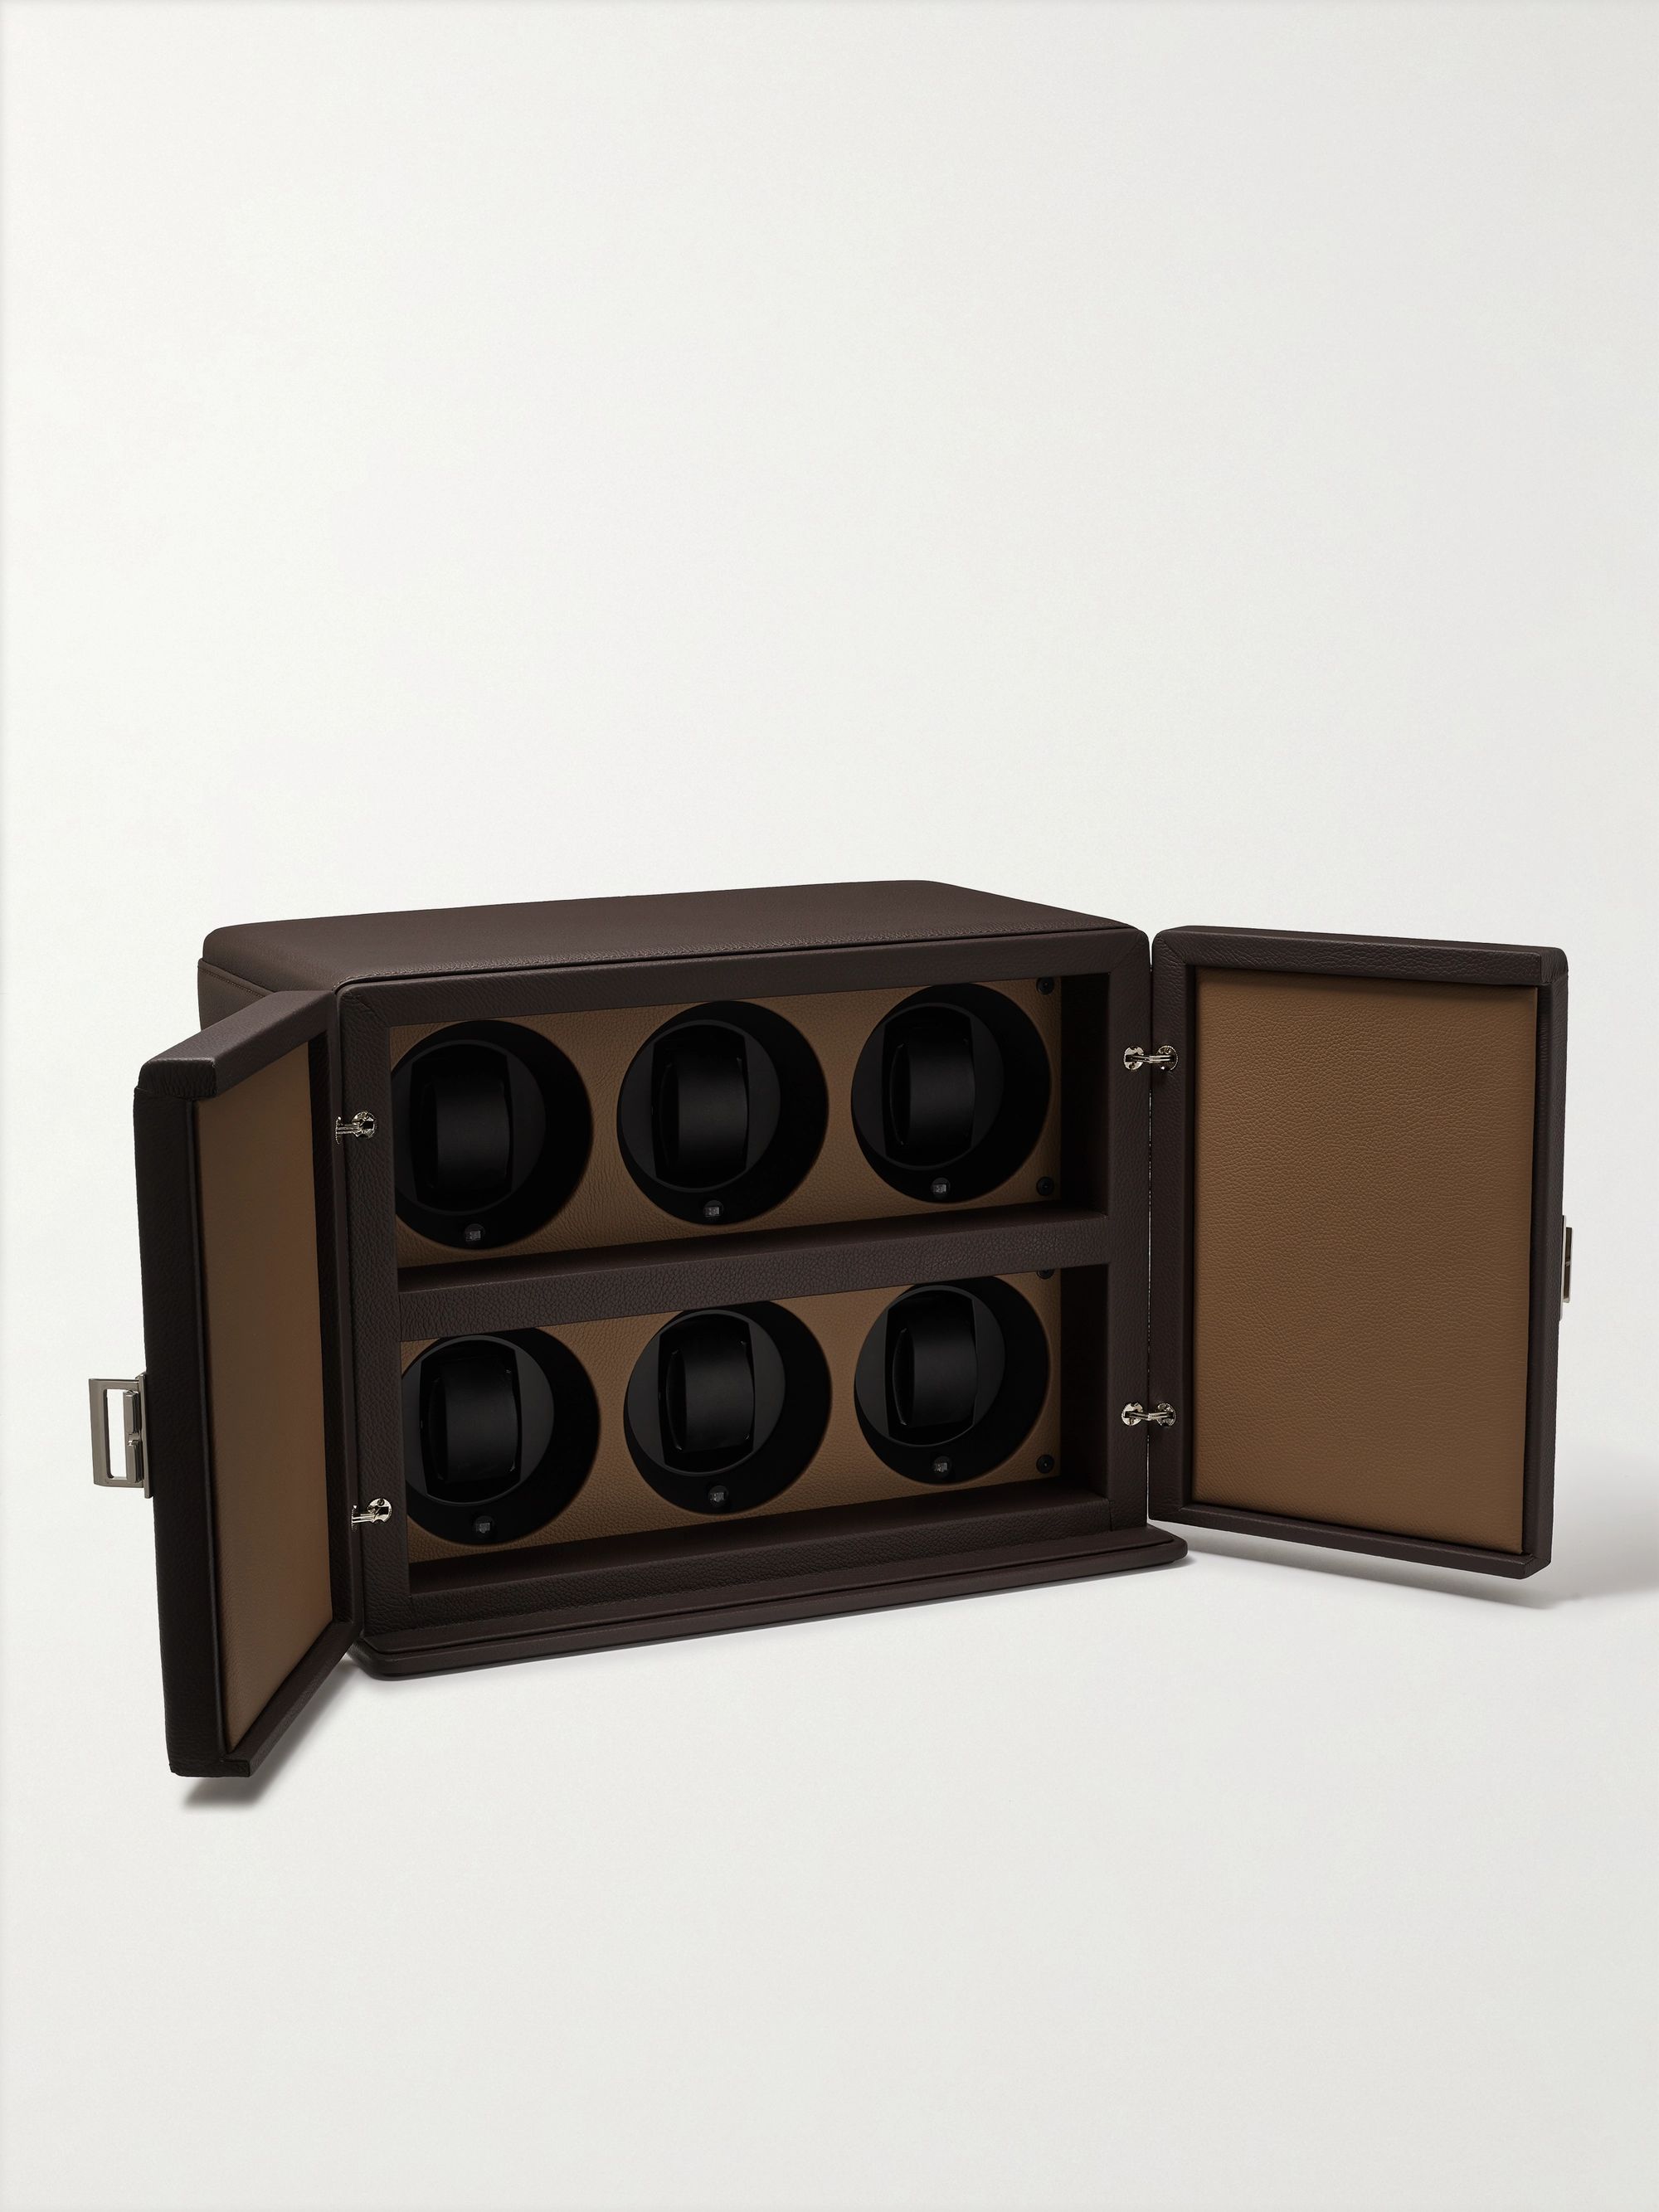 SCATOLA DEL TEMPO Rotore 6 Leather Six Watch Winder